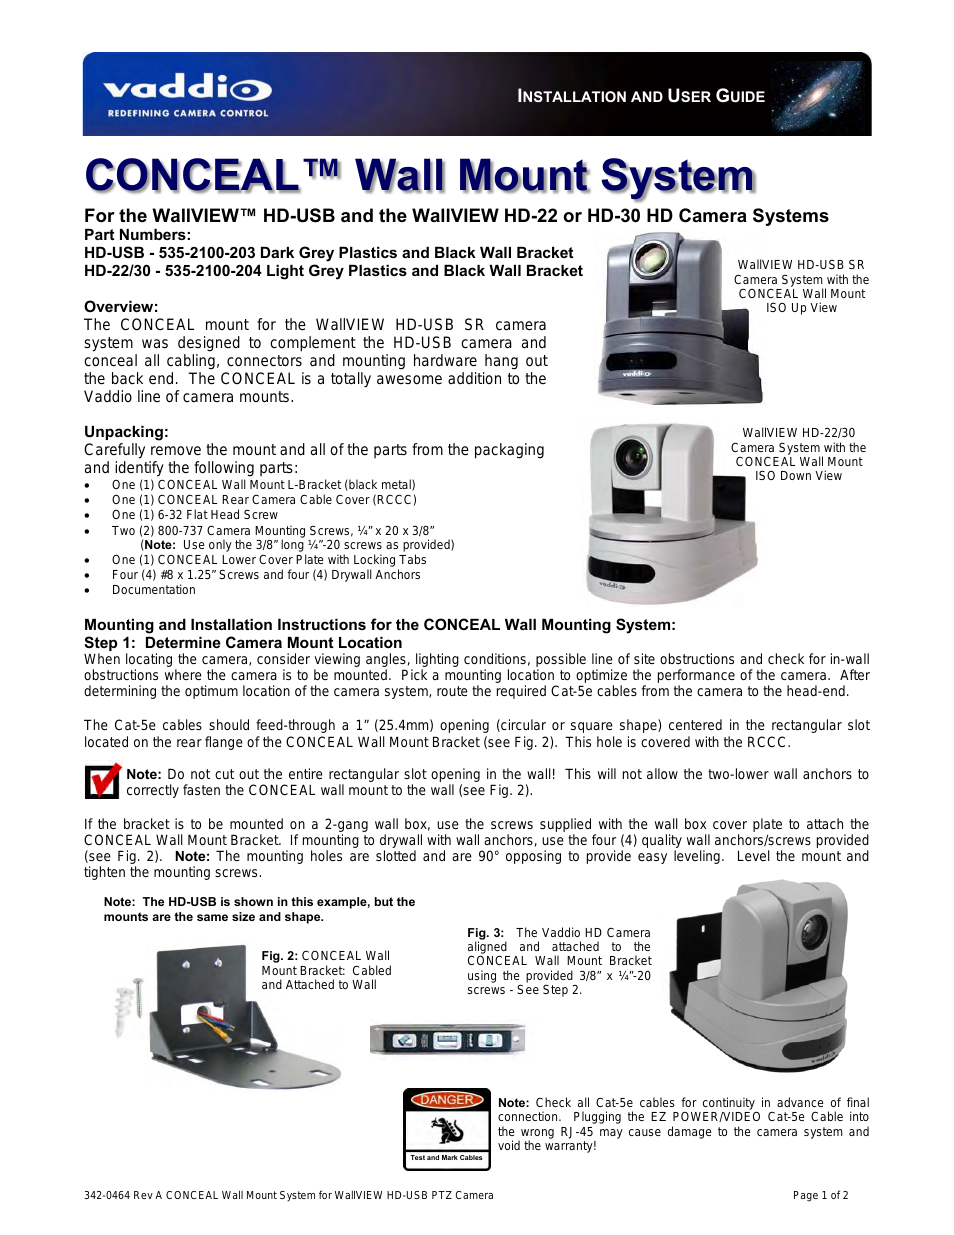 CONCEAL Wall Mounting System for WallVIEW HD-USB, PowerVIEW HD-22 & 30